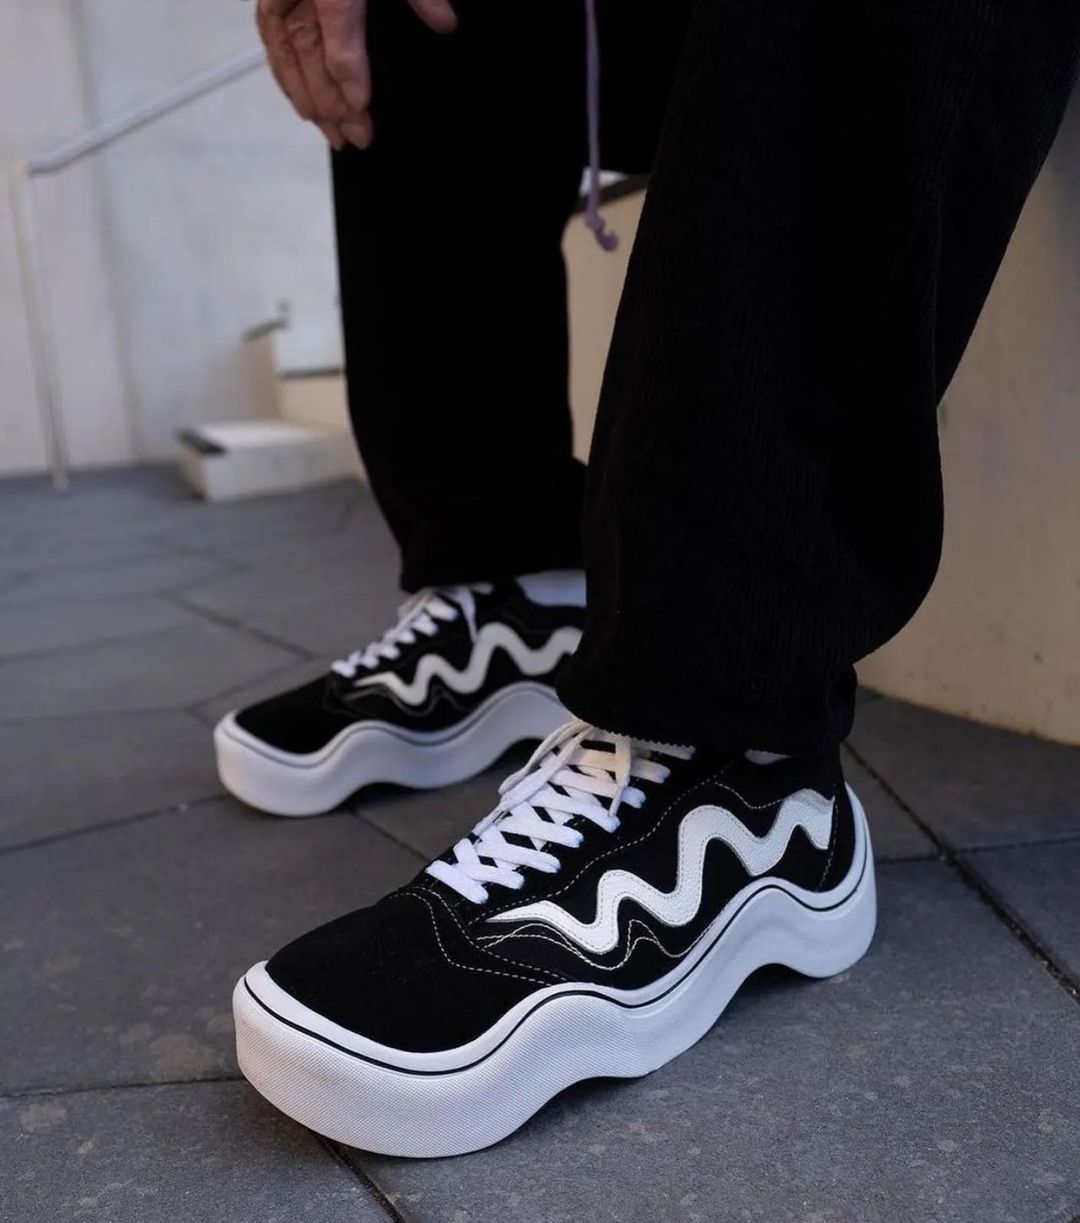 VANS Wavy Baby High Quality Available First Copy Shoe